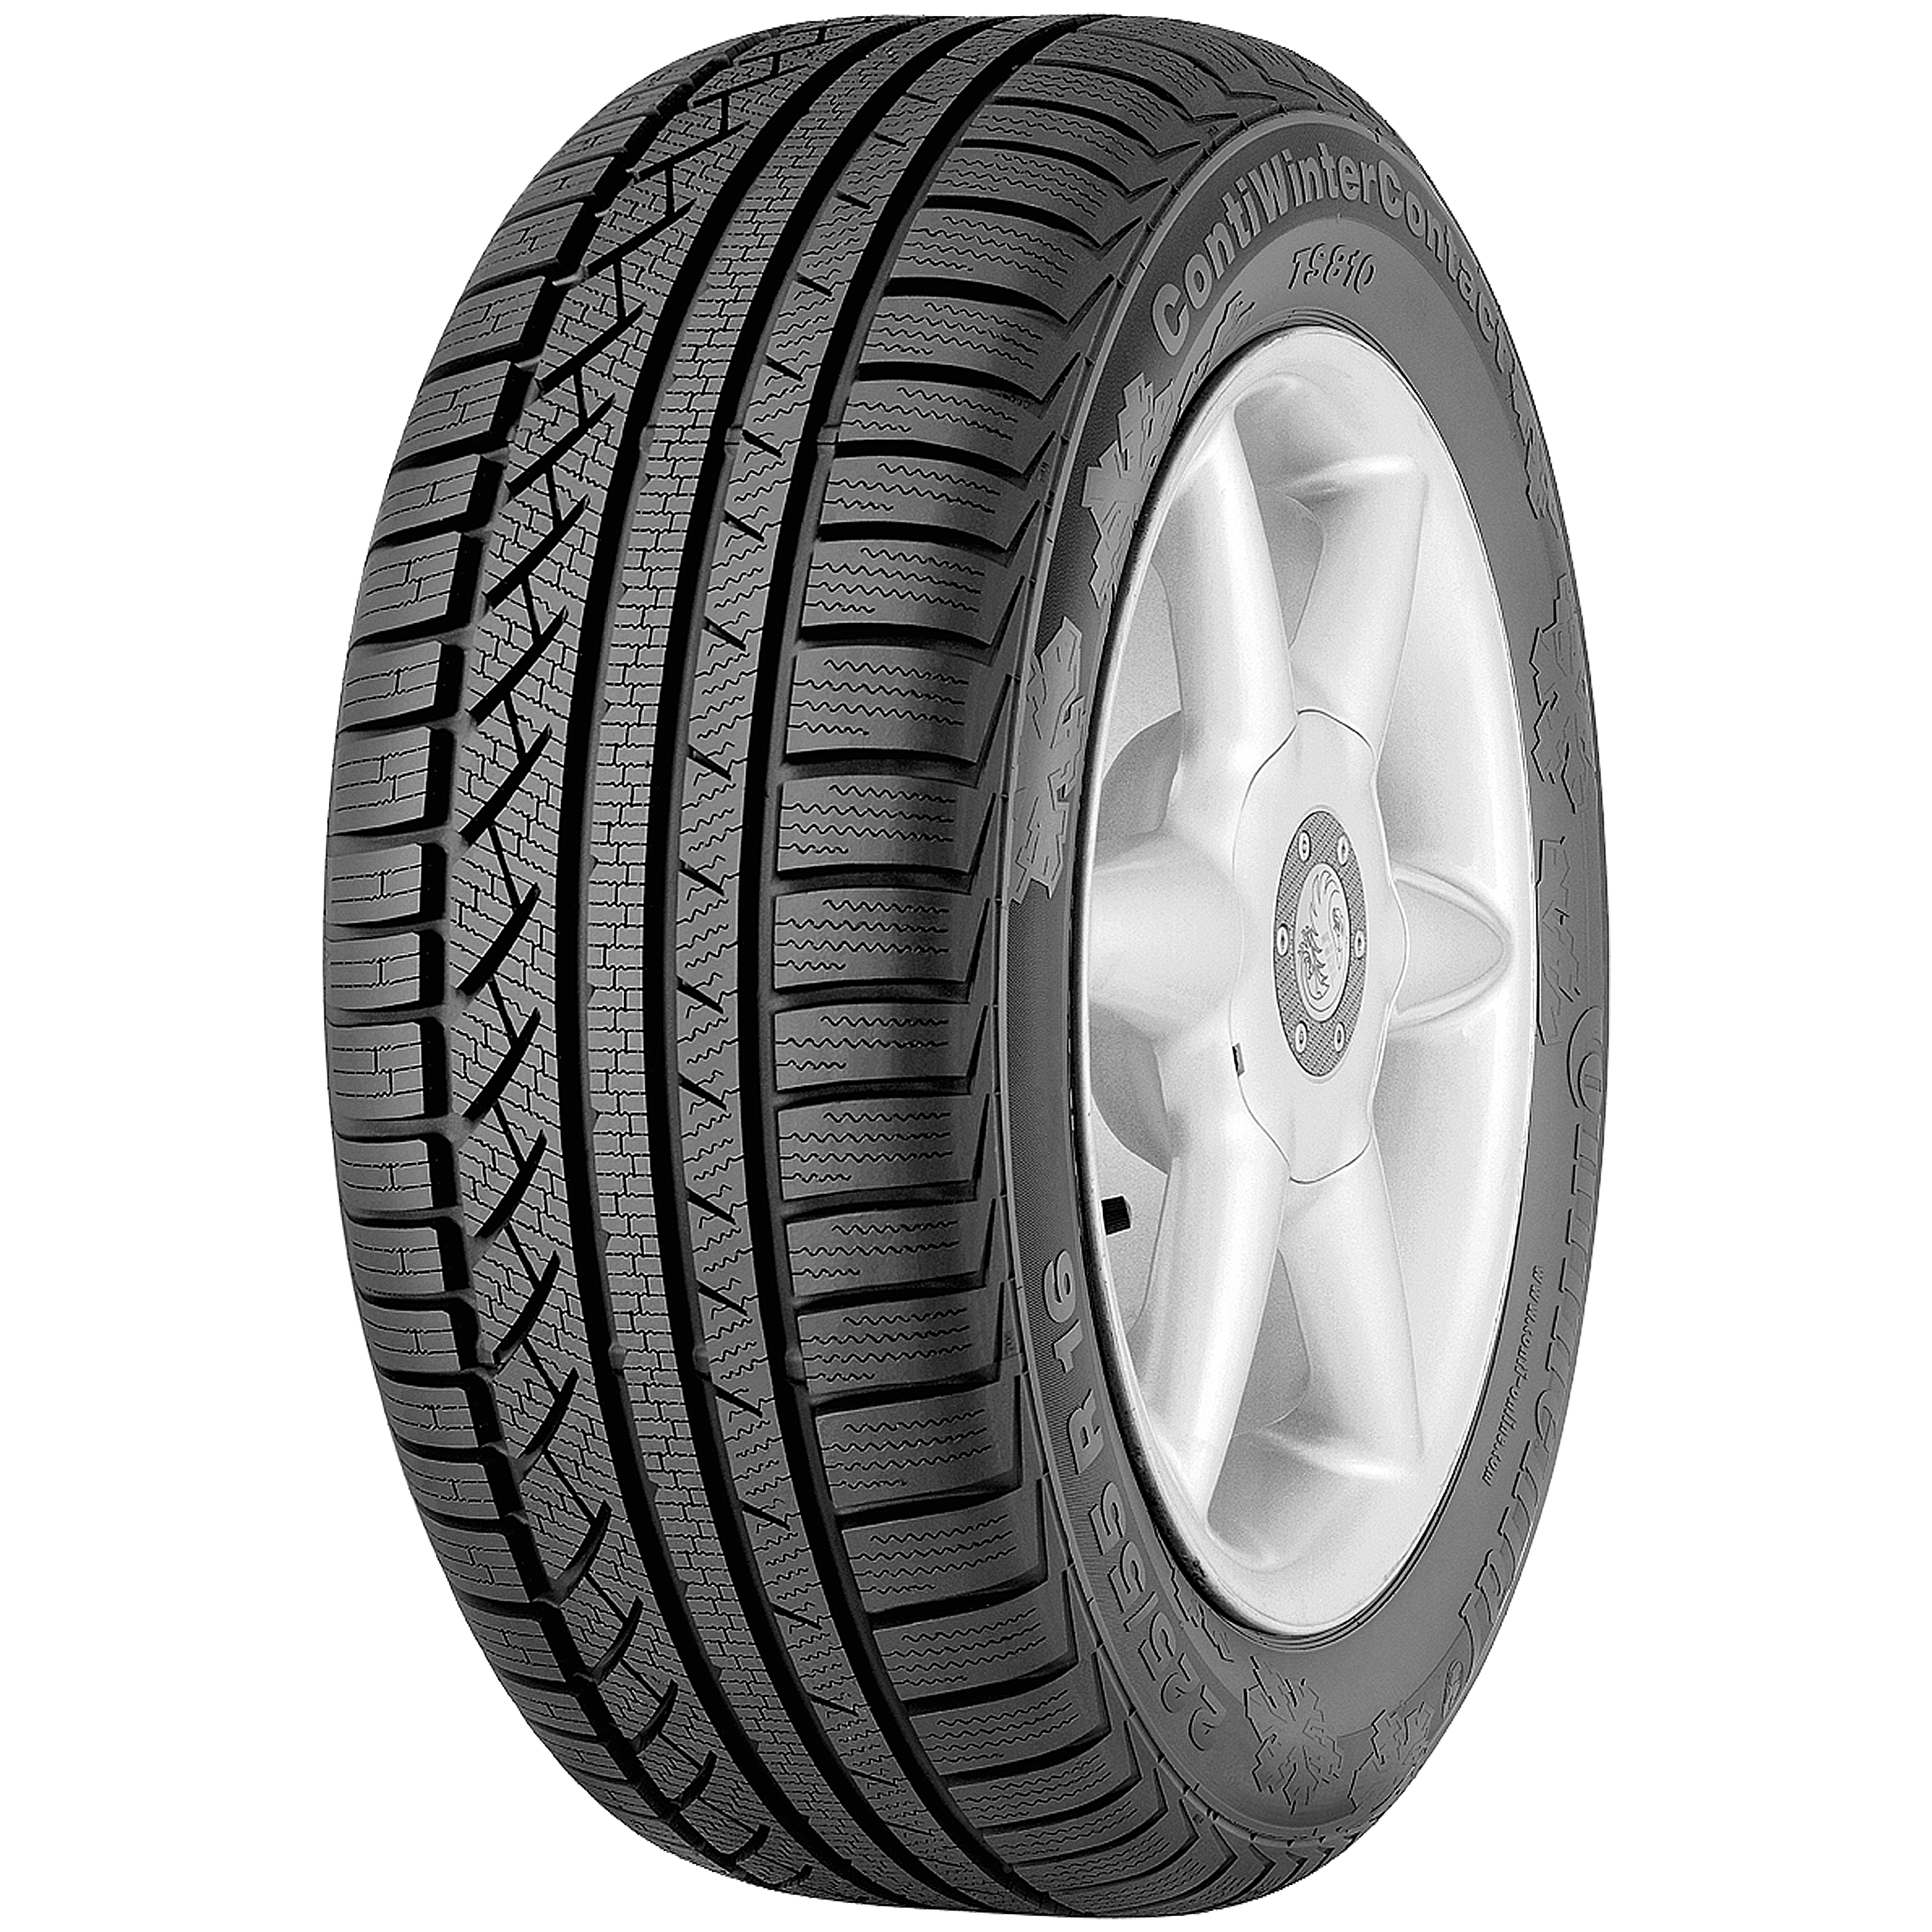 ContiWinterContact TS 810: The tire comfortable winter cars and luxury-class medium for